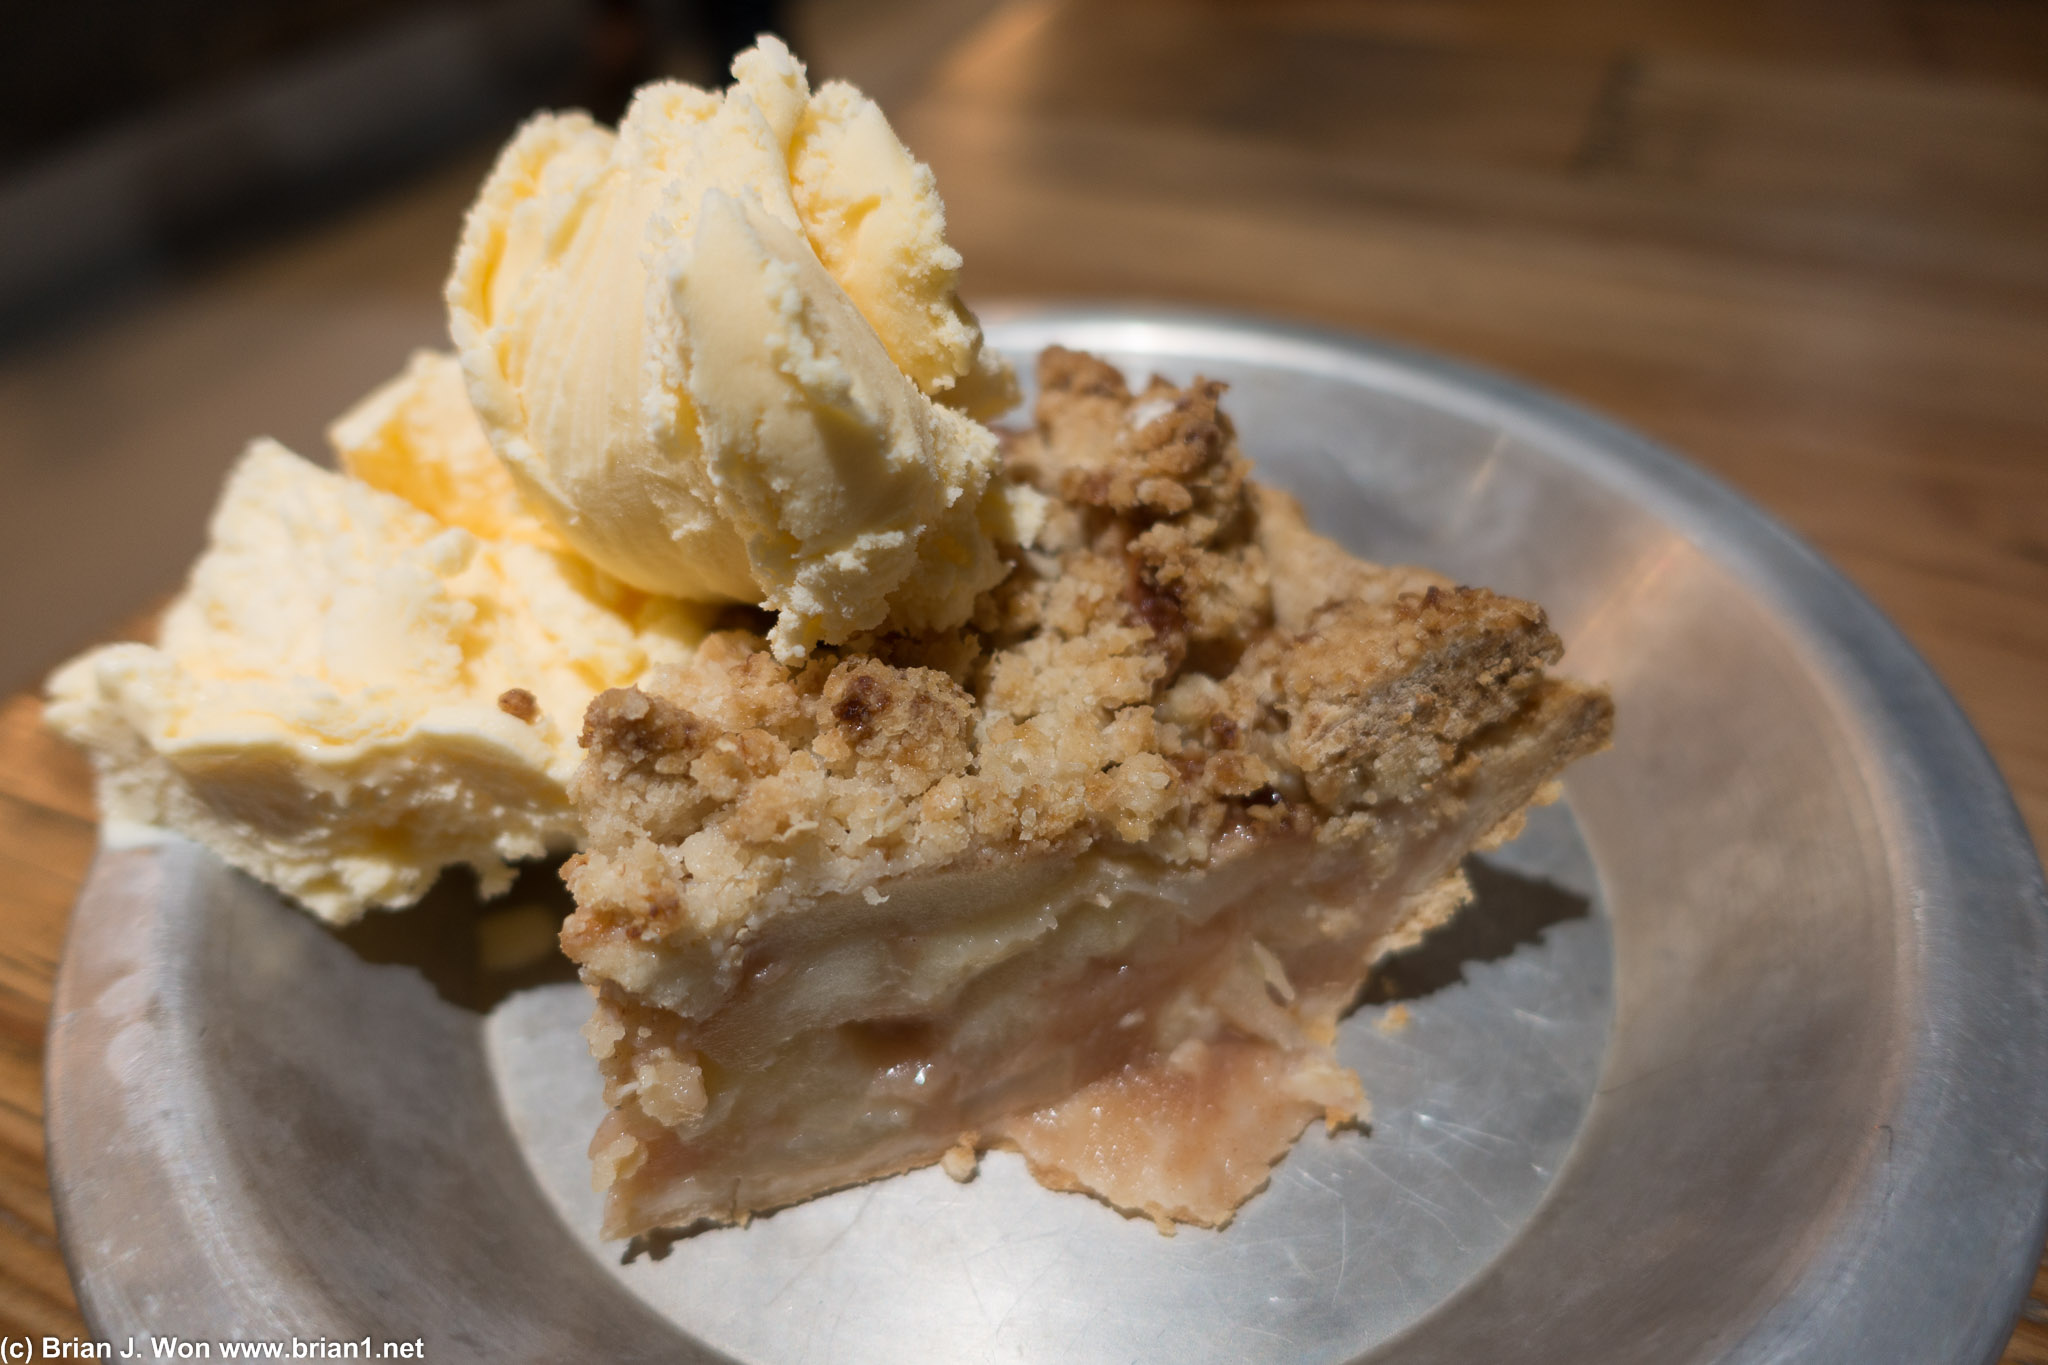 Pretty good apple pie, and a lot of ice cream. Need to go back to try the other pies...